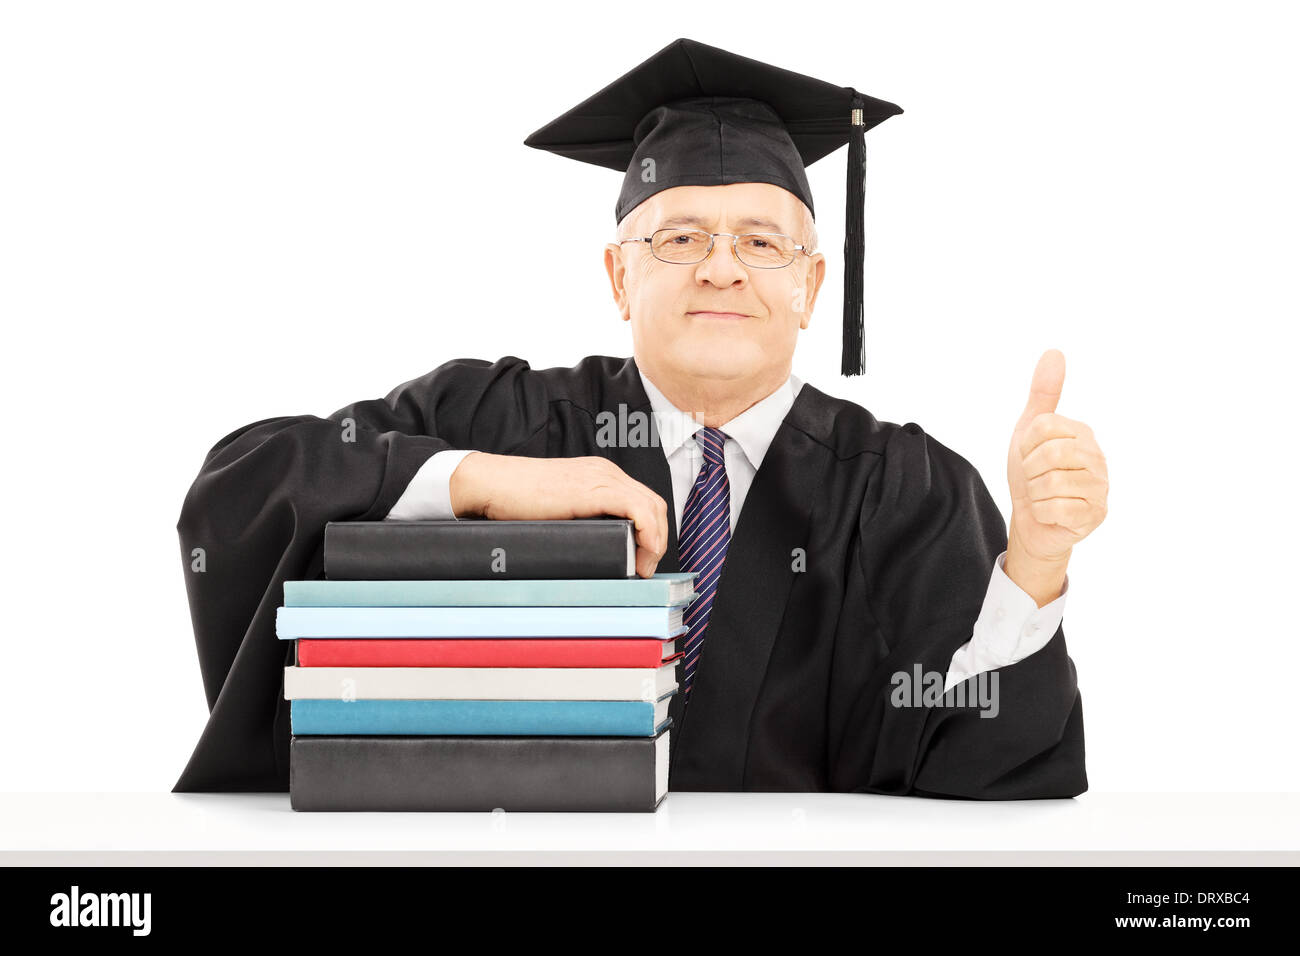 Middle aged college professor seated on table with stack of books and giving thumb up Stock Photo